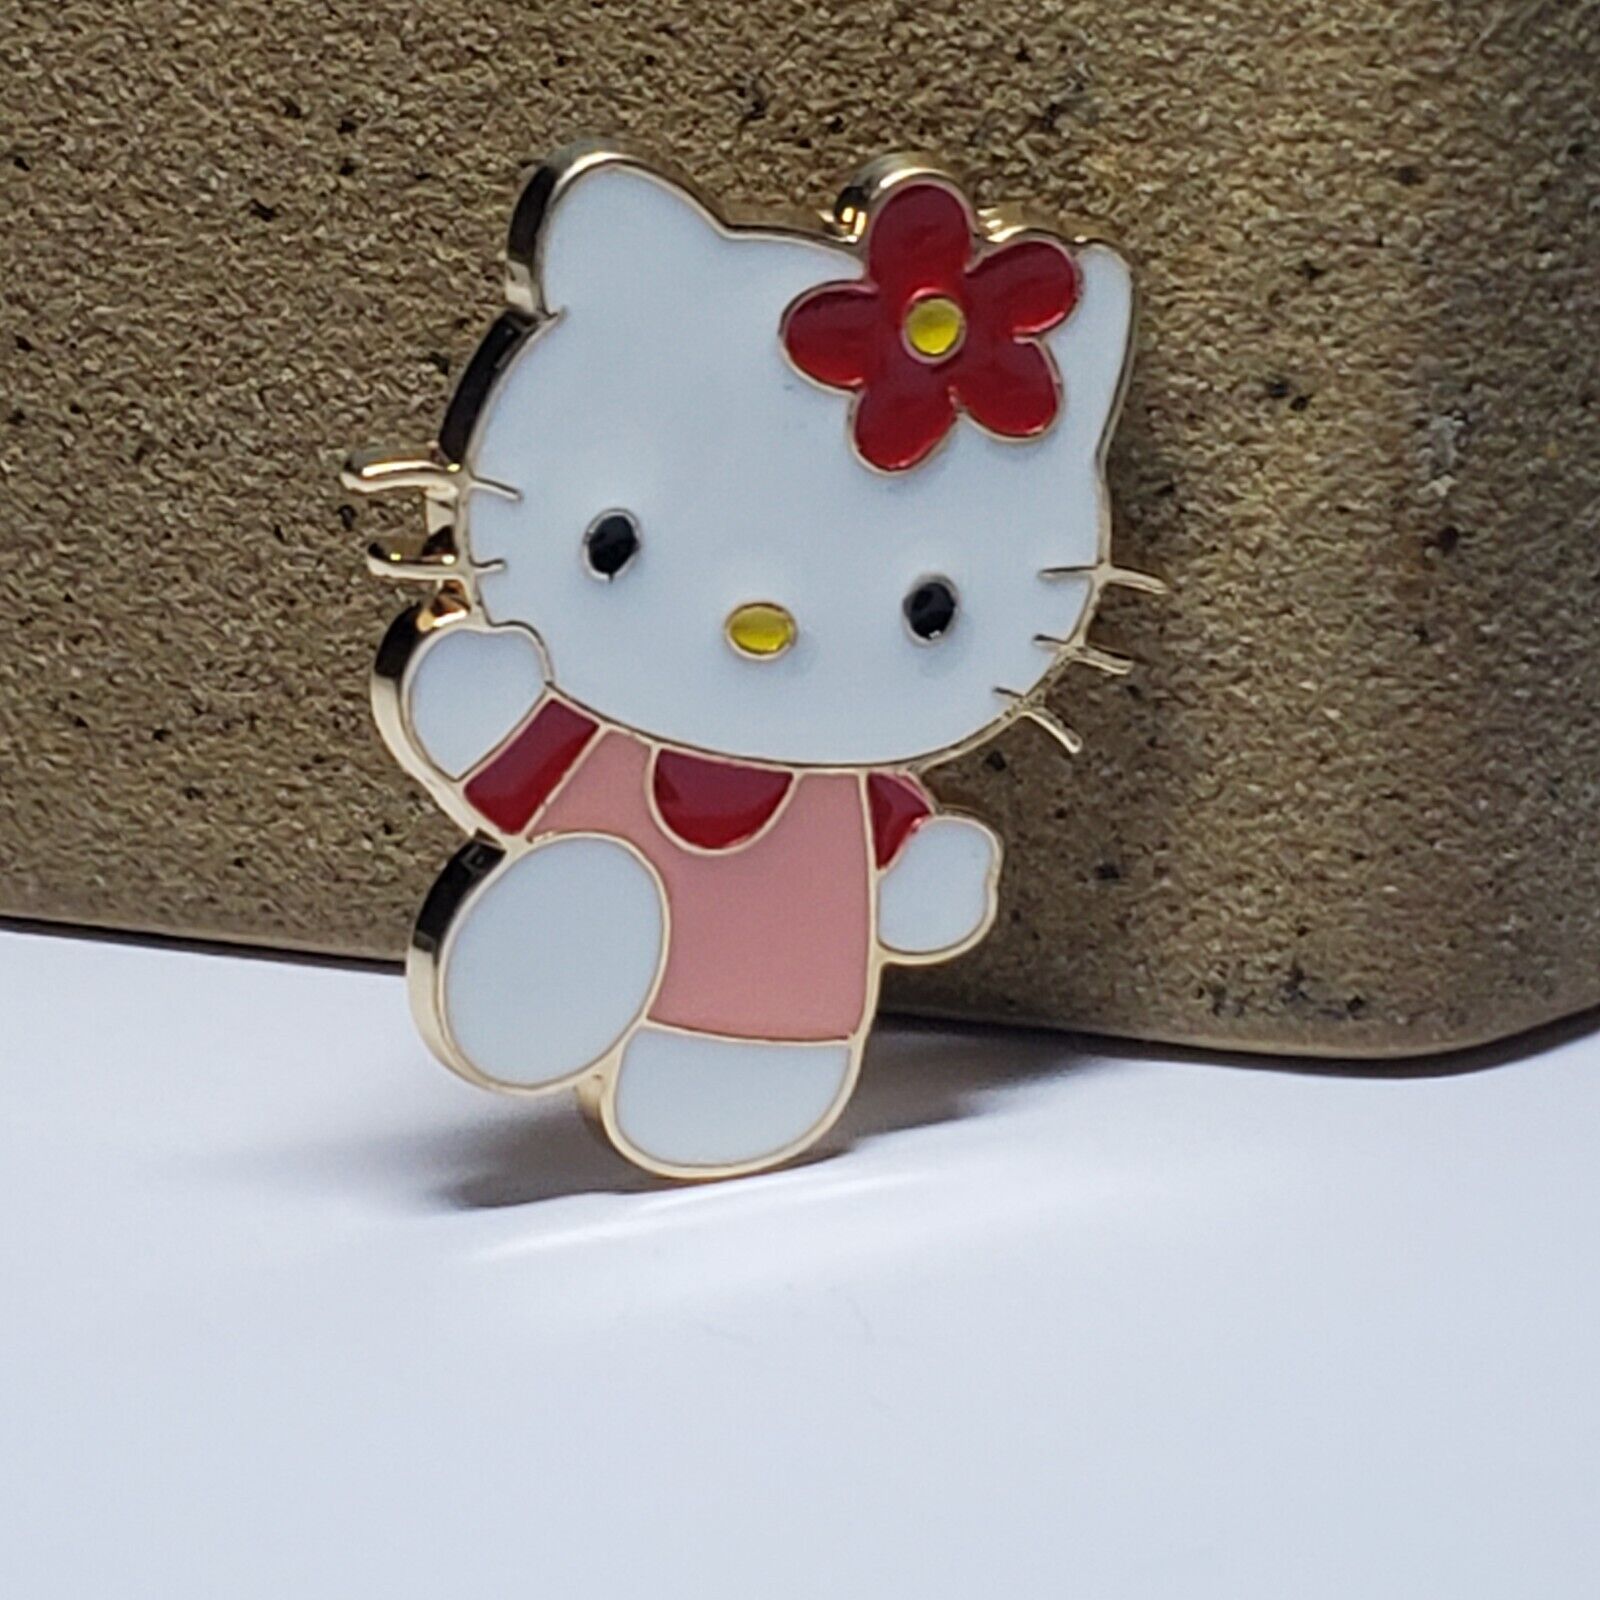 Hello Kitty Brooch Pin Cute Collectible Cat Adorable 